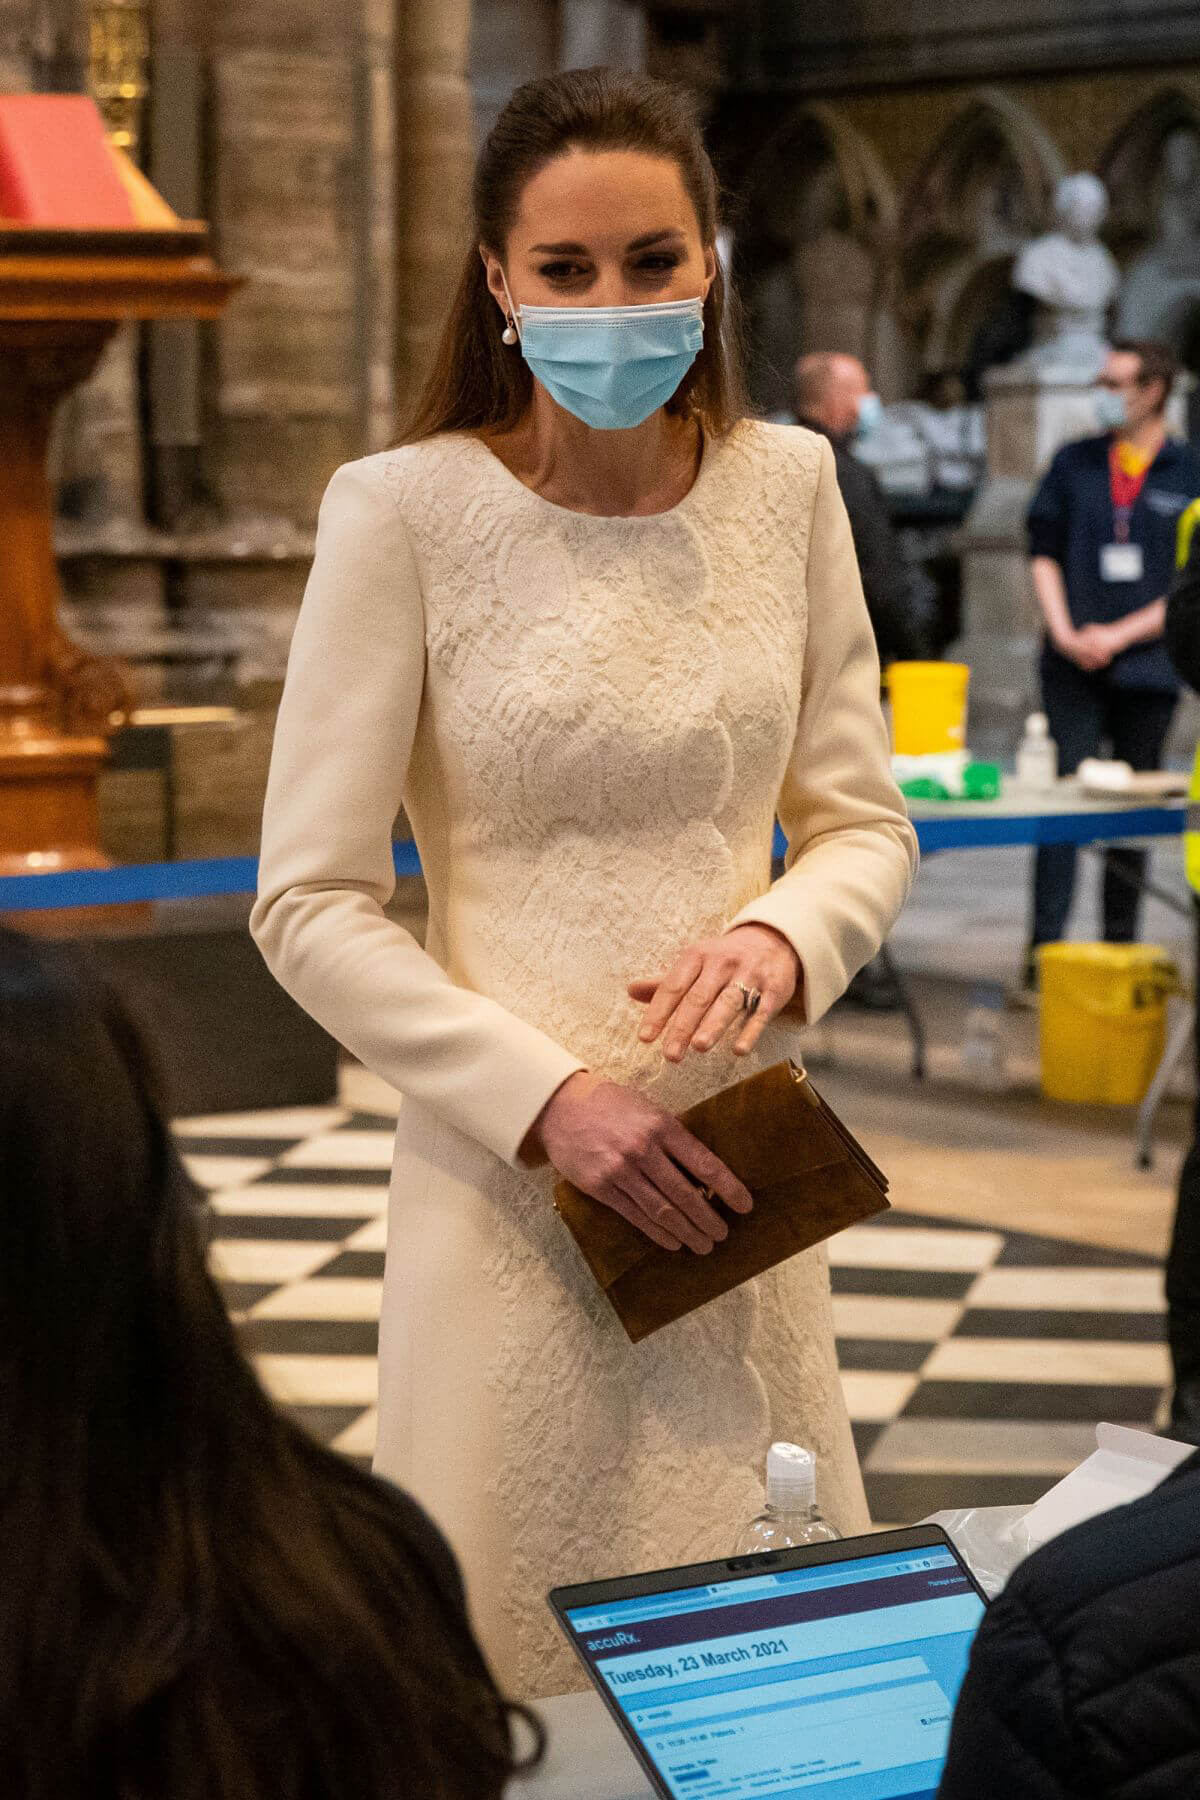 Kate Middleton Seen at Coronavirus Disease Vaccination Centre at Westminster Abbey 03/23/2021